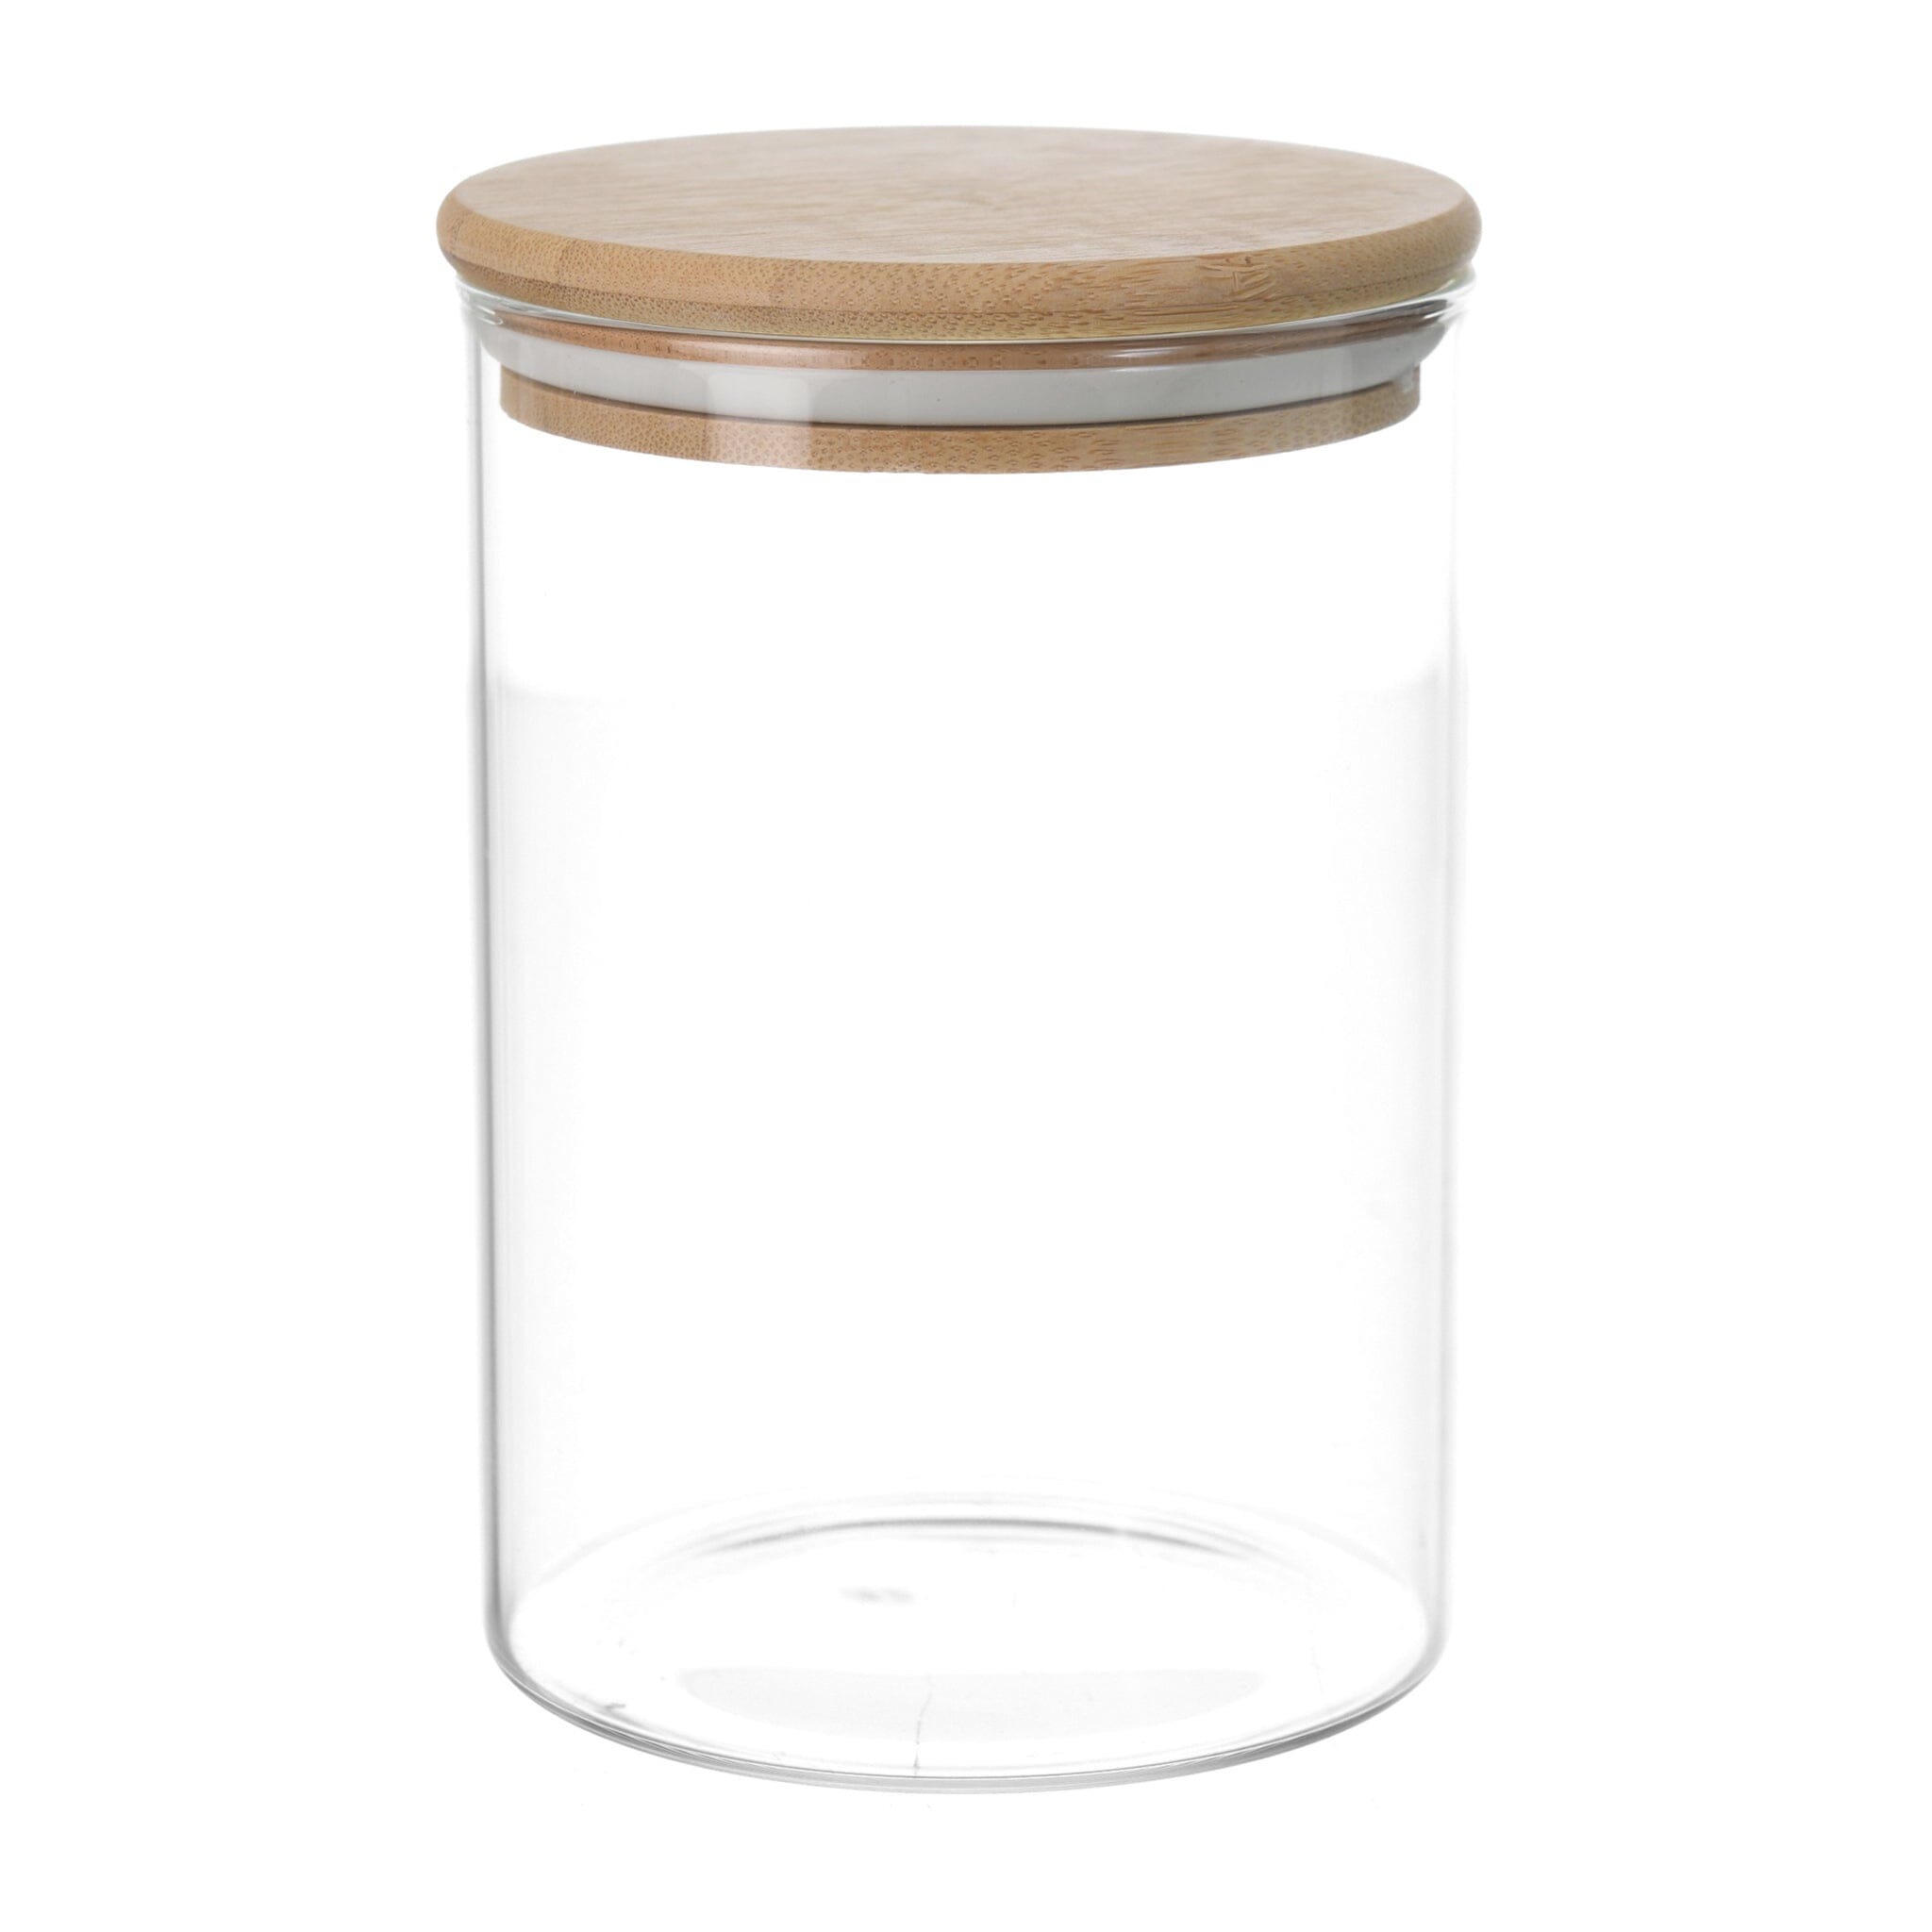 O'lala - Glass Jar with Wooden Cover - White - 10x15cm - 520008040